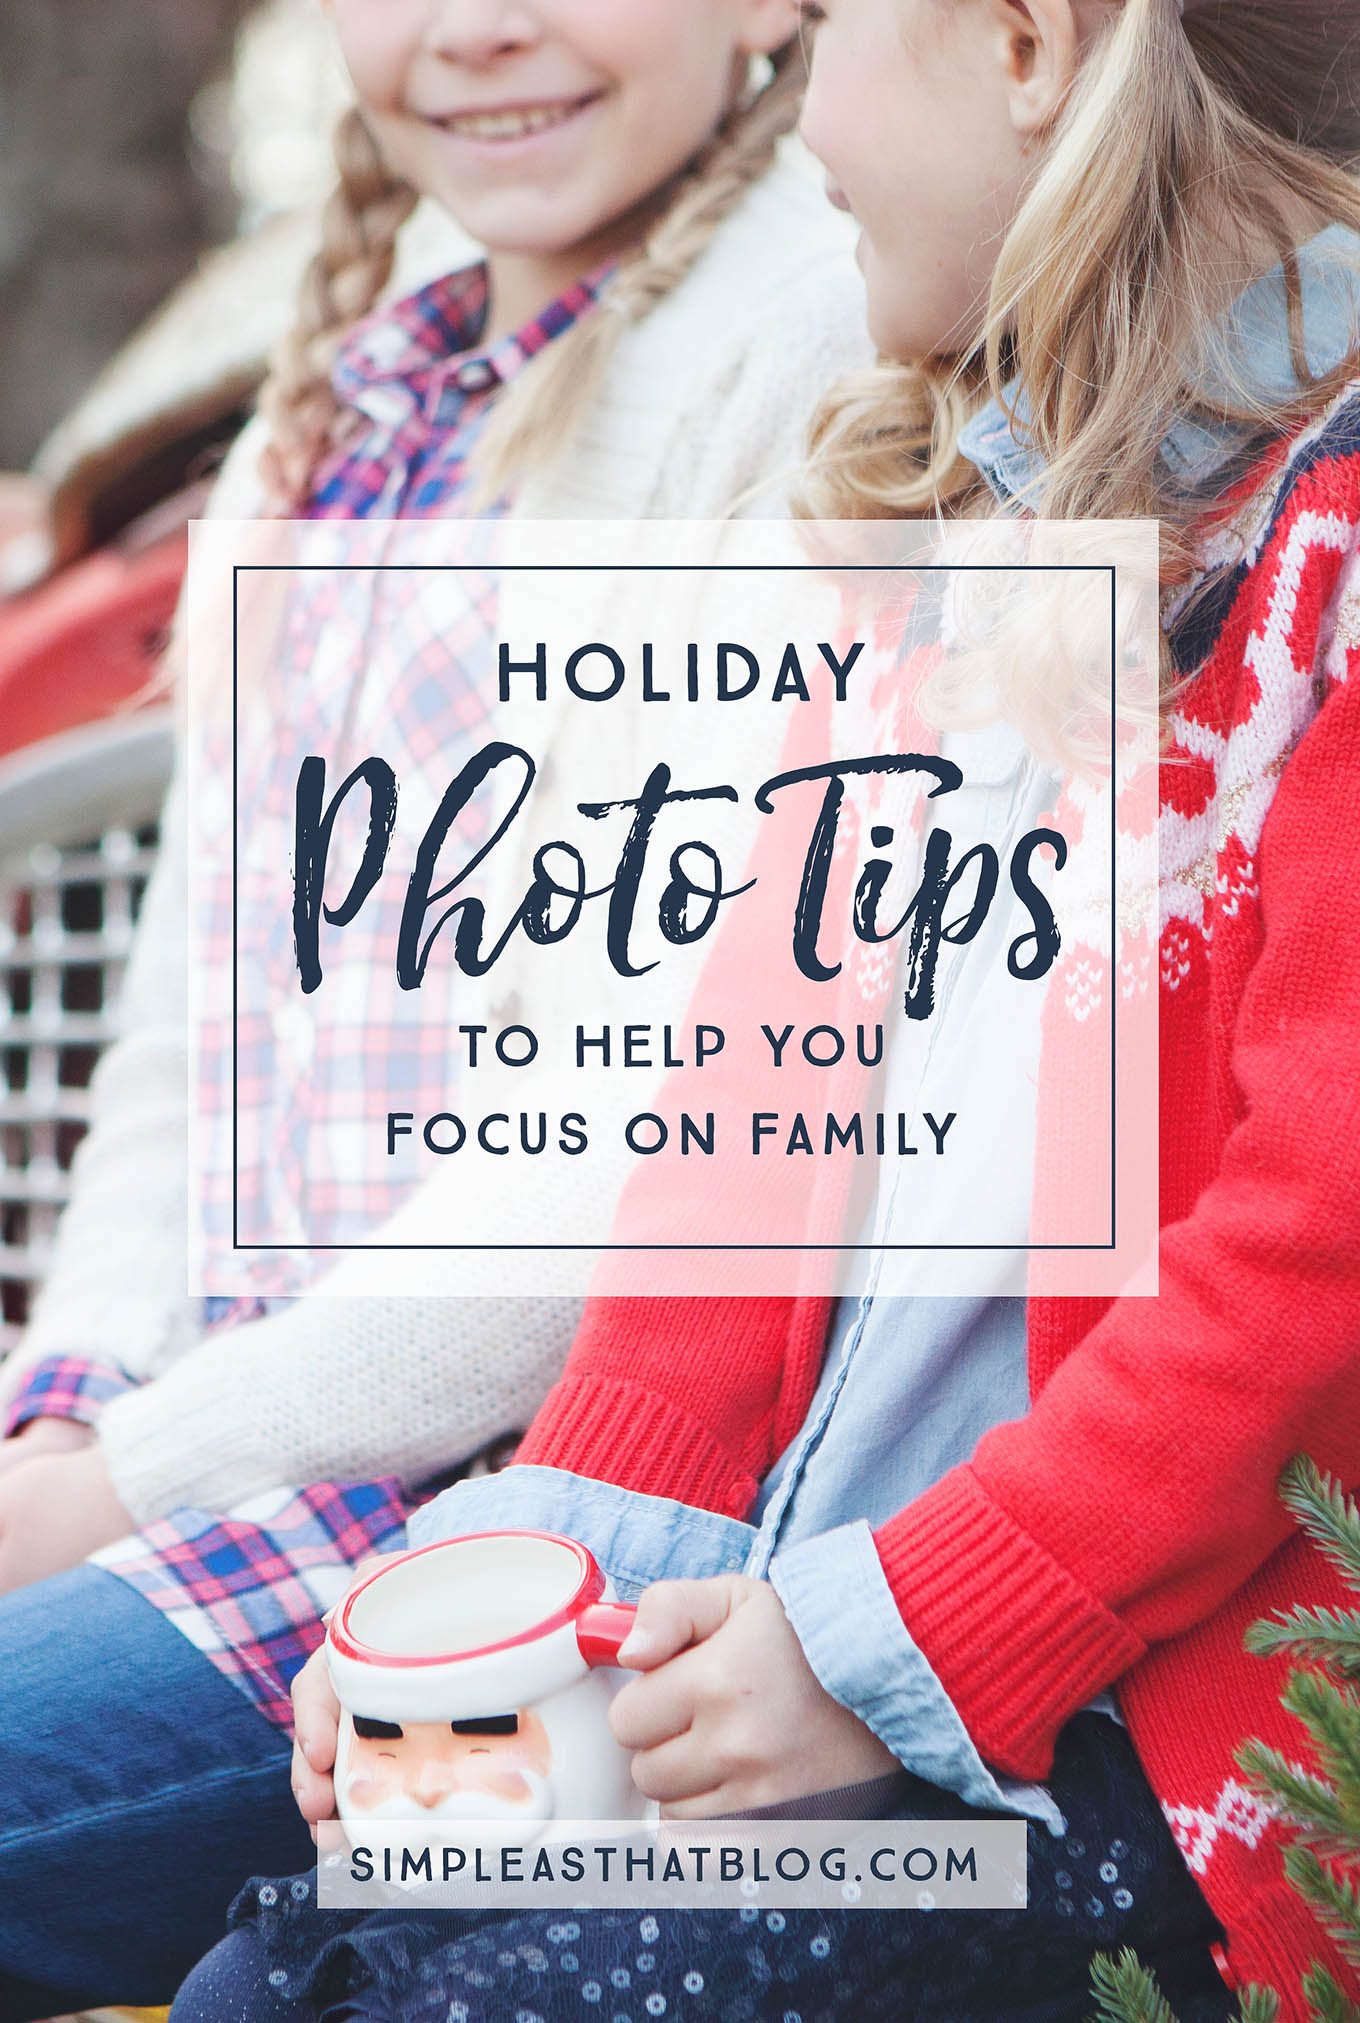 Do you want to focus on family this month and be IN those memories, instead of always watching them through the lens? These tips will help you capture the photos you really want while still allowing you to be present and focus on the joy of family during the holidays.